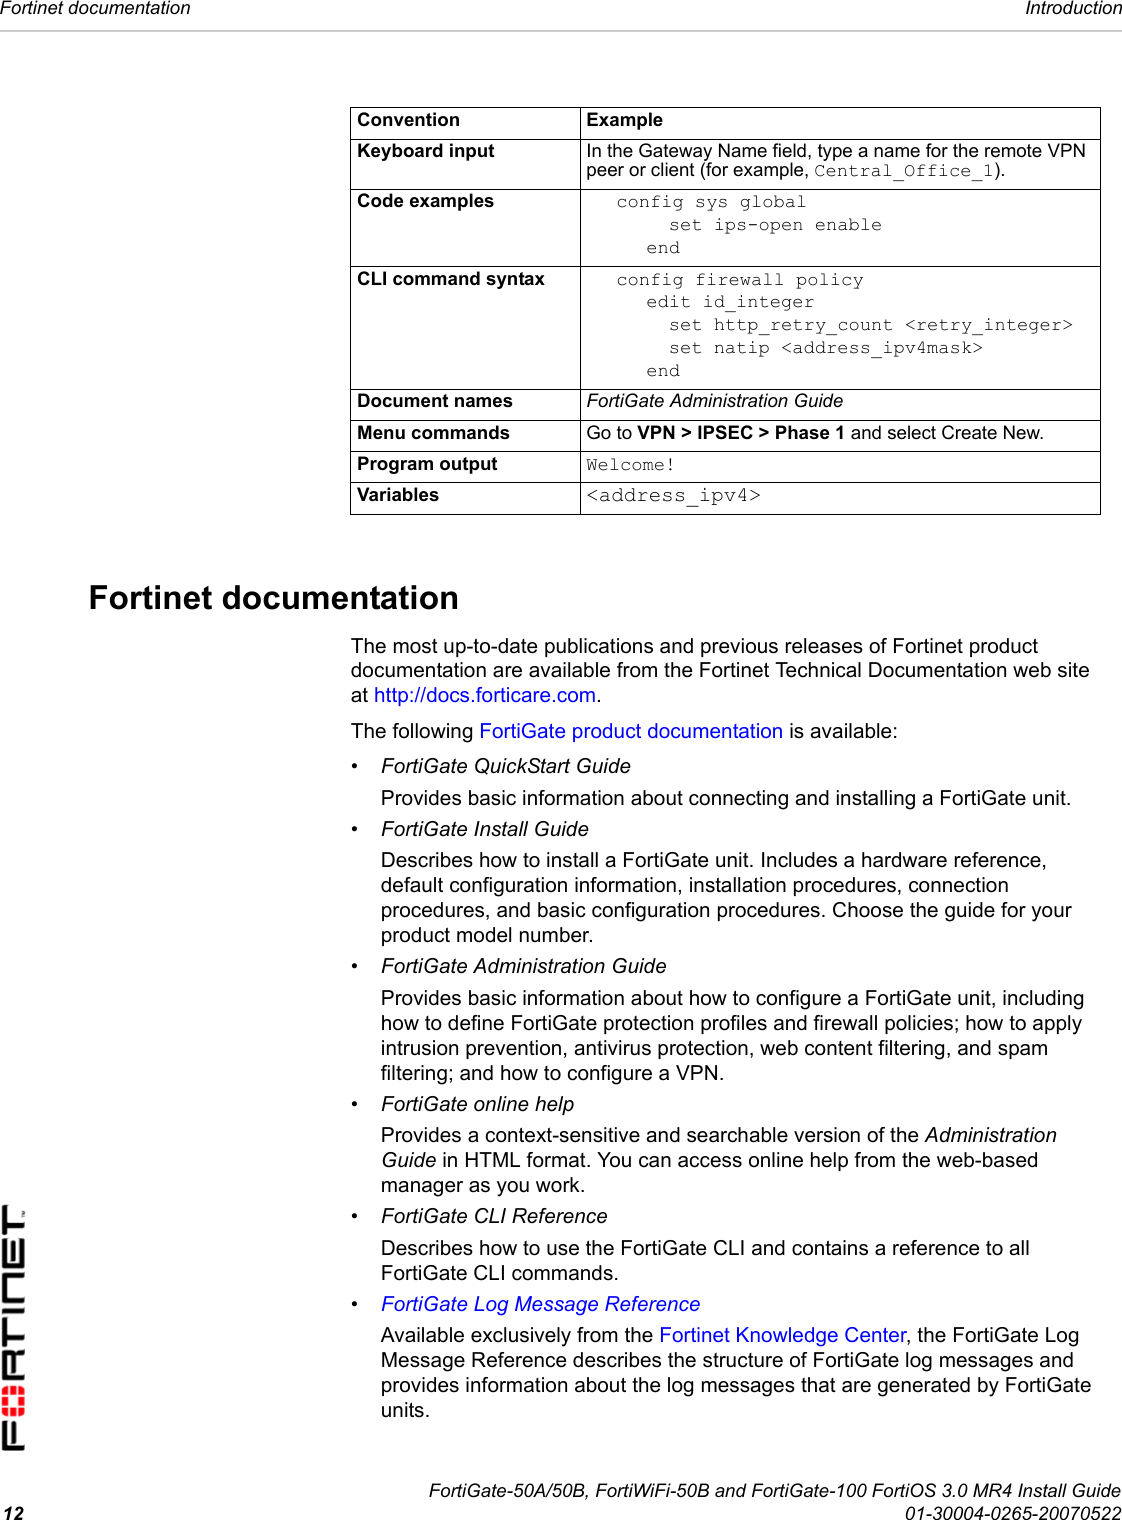 FortiGate-50A/50B, FortiWiFi-50B and FortiGate-100 FortiOS 3.0 MR4 Install Guide12 01-30004-0265-20070522Fortinet documentation IntroductionFortinet documentation The most up-to-date publications and previous releases of Fortinet product documentation are available from the Fortinet Technical Documentation web site at http://docs.forticare.com. The following FortiGate product documentation is available:• FortiGate QuickStart GuideProvides basic information about connecting and installing a FortiGate unit.• FortiGate Install GuideDescribes how to install a FortiGate unit. Includes a hardware reference, default configuration information, installation procedures, connection procedures, and basic configuration procedures. Choose the guide for your product model number.• FortiGate Administration GuideProvides basic information about how to configure a FortiGate unit, including how to define FortiGate protection profiles and firewall policies; how to apply intrusion prevention, antivirus protection, web content filtering, and spam filtering; and how to configure a VPN. • FortiGate online helpProvides a context-sensitive and searchable version of the Administration Guide in HTML format. You can access online help from the web-based manager as you work.• FortiGate CLI ReferenceDescribes how to use the FortiGate CLI and contains a reference to all FortiGate CLI commands.•FortiGate Log Message ReferenceAvailable exclusively from the Fortinet Knowledge Center, the FortiGate Log Message Reference describes the structure of FortiGate log messages and provides information about the log messages that are generated by FortiGate units.Convention ExampleKeyboard input In the Gateway Name field, type a name for the remote VPN peer or client (for example, Central_Office_1).Code examples config sys globalset ips-open enableendCLI command syntax config firewall policyedit id_integerset http_retry_count &lt;retry_integer&gt;set natip &lt;address_ipv4mask&gt;endDocument names FortiGate Administration GuideMenu commands Go to VPN &gt; IPSEC &gt; Phase 1 and select Create New.Program output Welcome!Variables &lt;address_ipv4&gt;